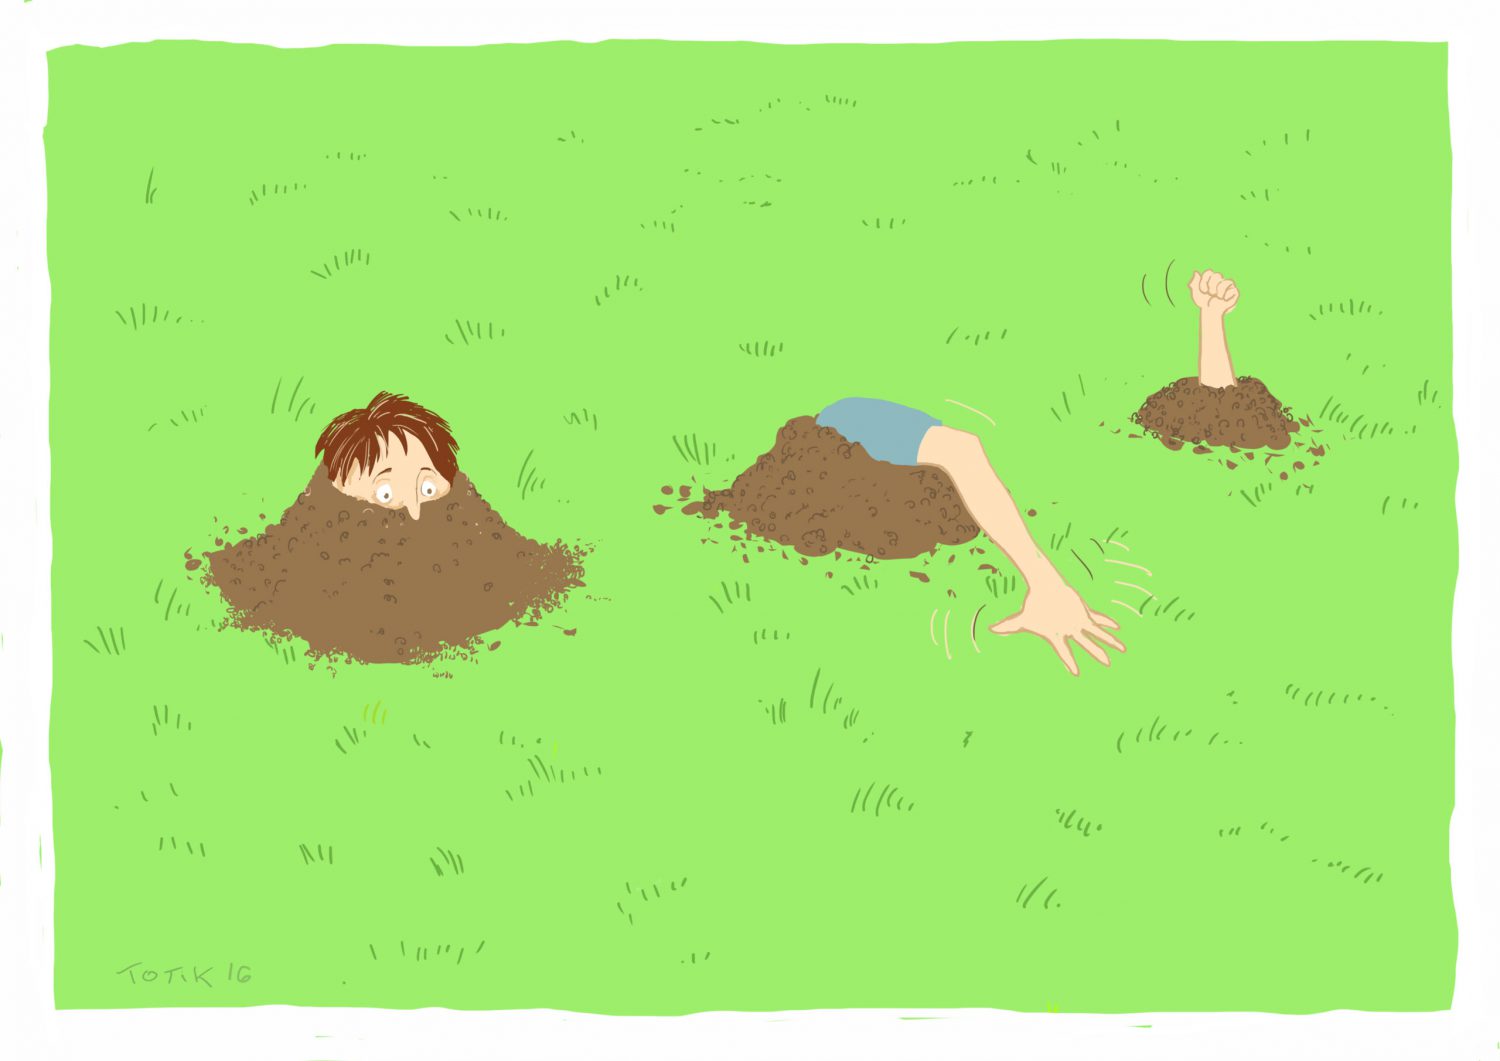 a head, left arm and right arm are buried in three different mounds of soil